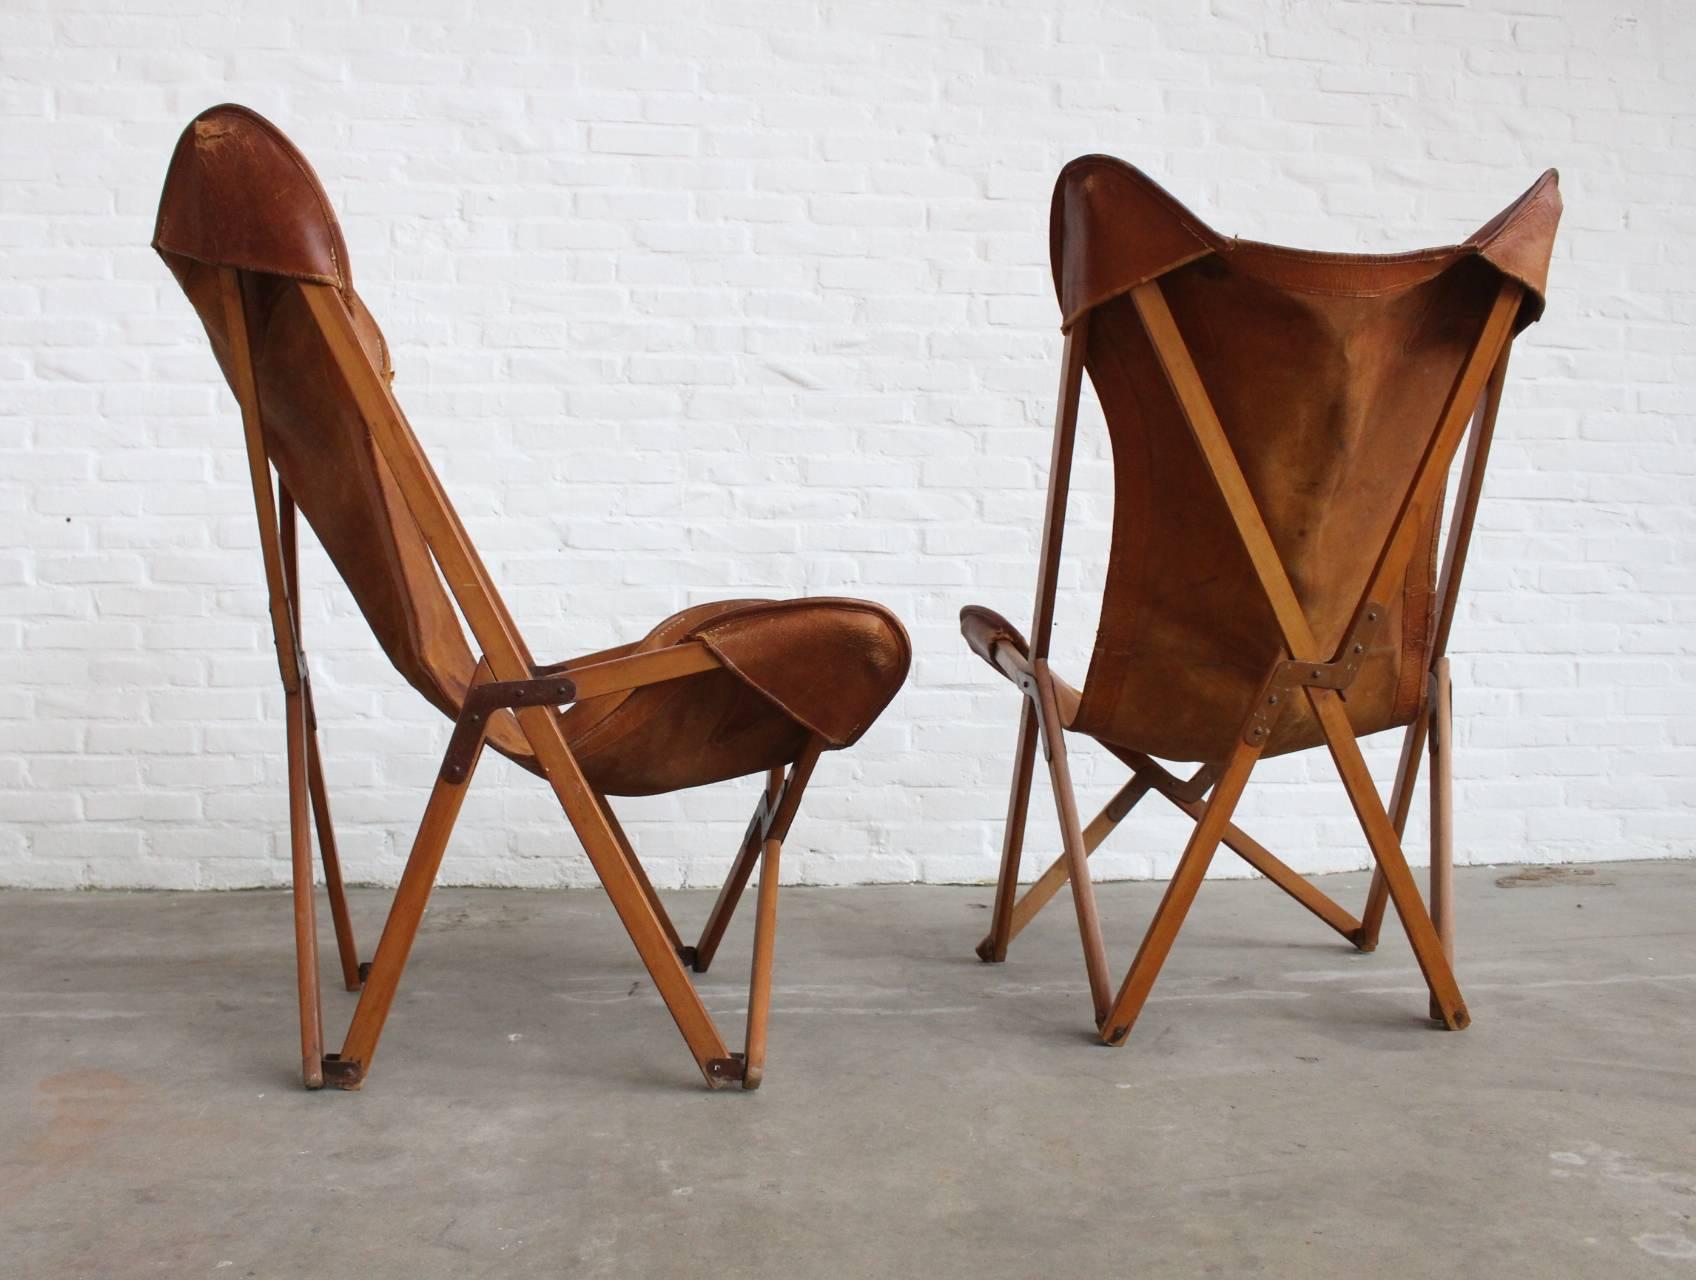 An extremely rare set of the 'Tripolina' folding chair designed by Joseph B. Fenby.

The Tripolina chair was made from prior to WWII by the firm of Viganò in Tripoli, Libya, for the expatriate Italian market as a camping chair of great stability